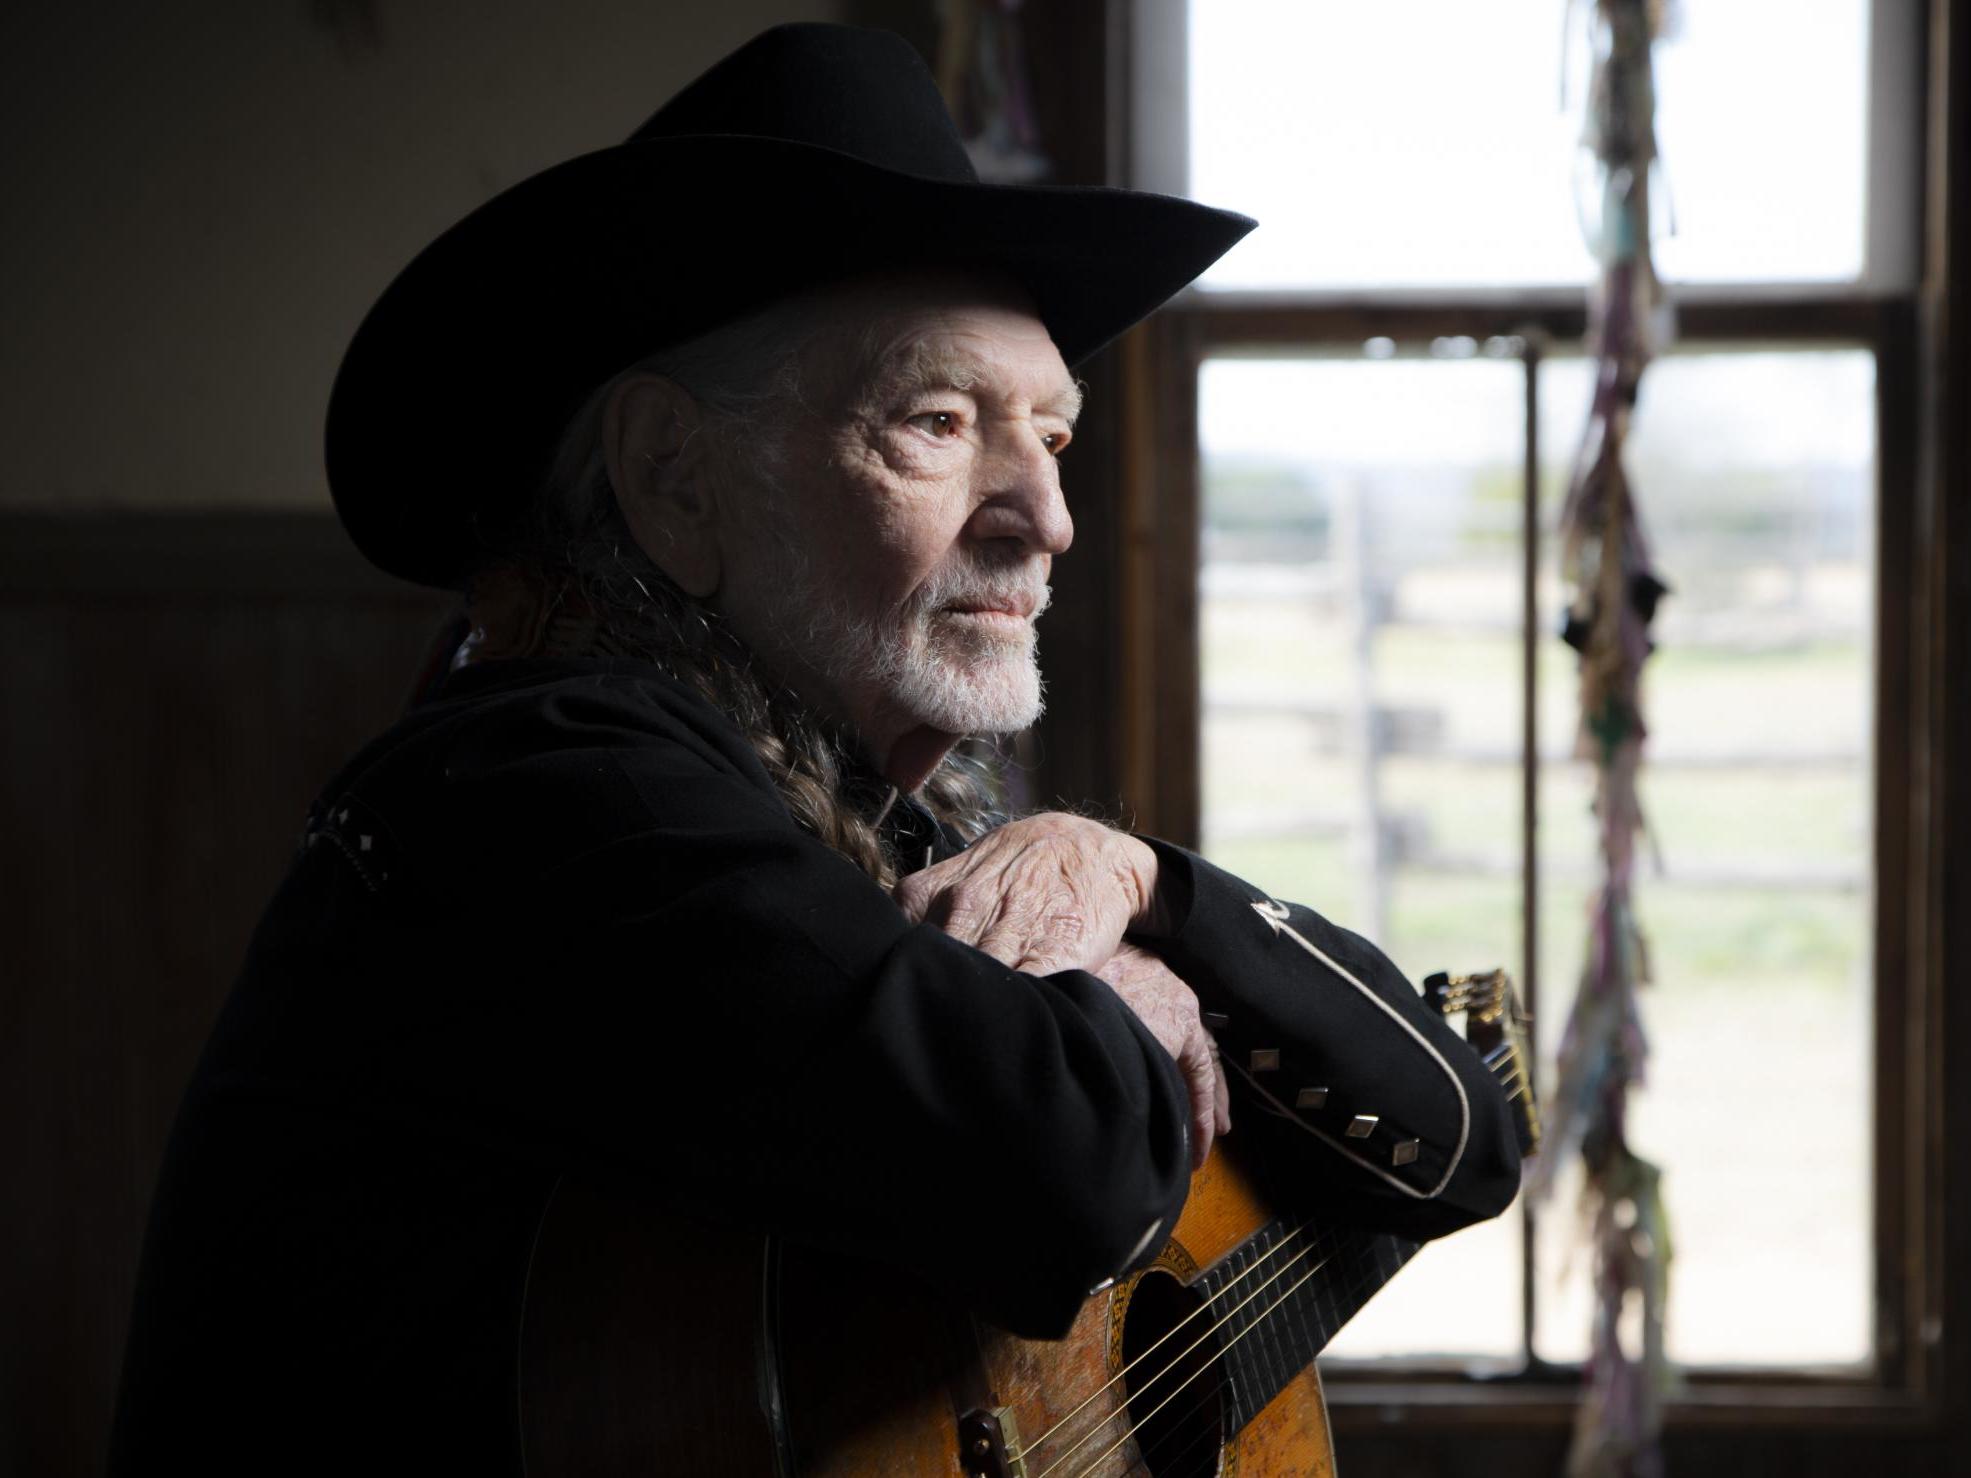 There's catharsis in Willie Nelson's beguiling delivery